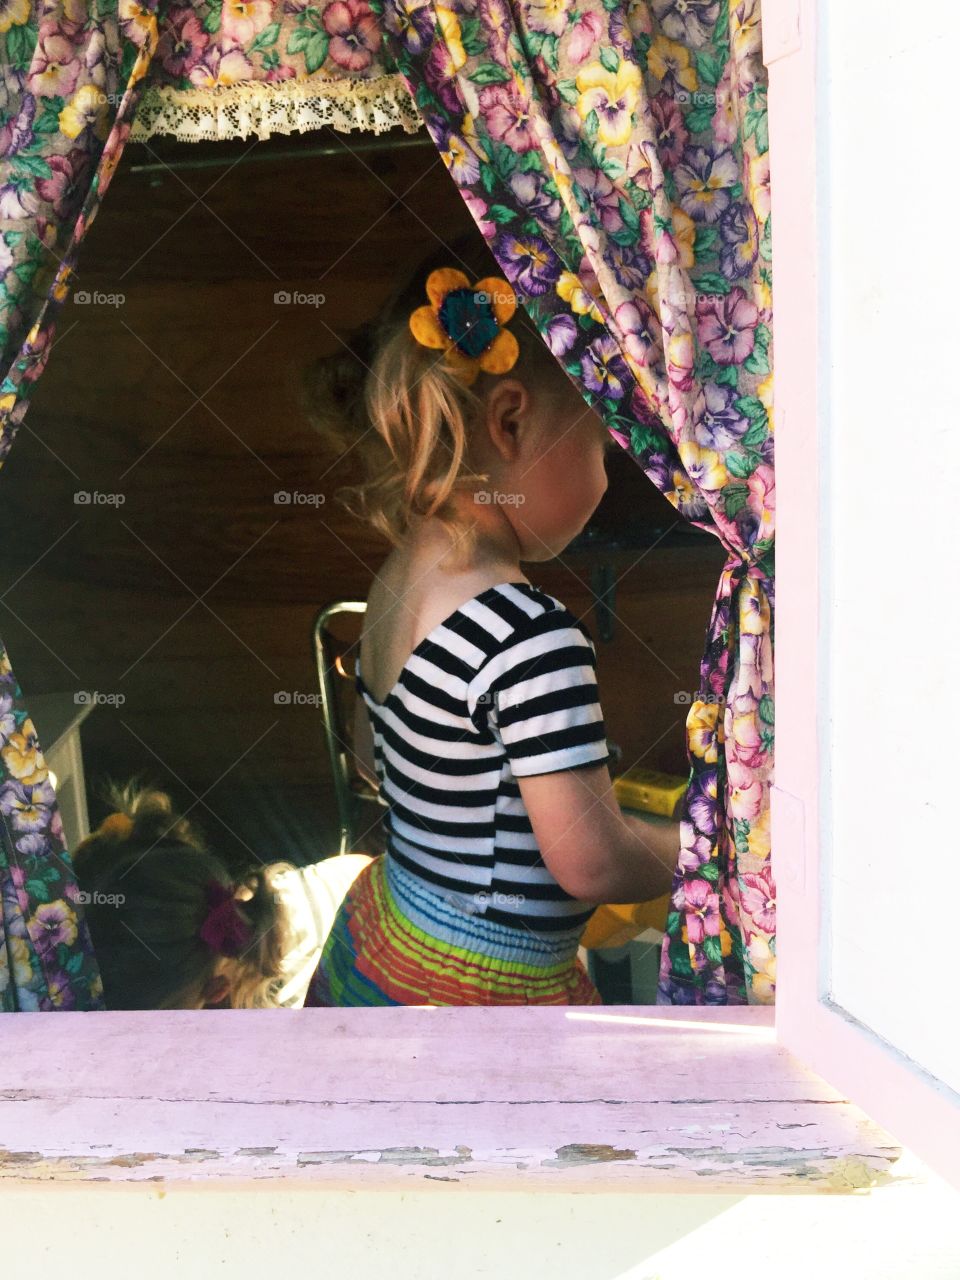 Blonde little girl with pigtails whimsically dressed viewed through playhouse window